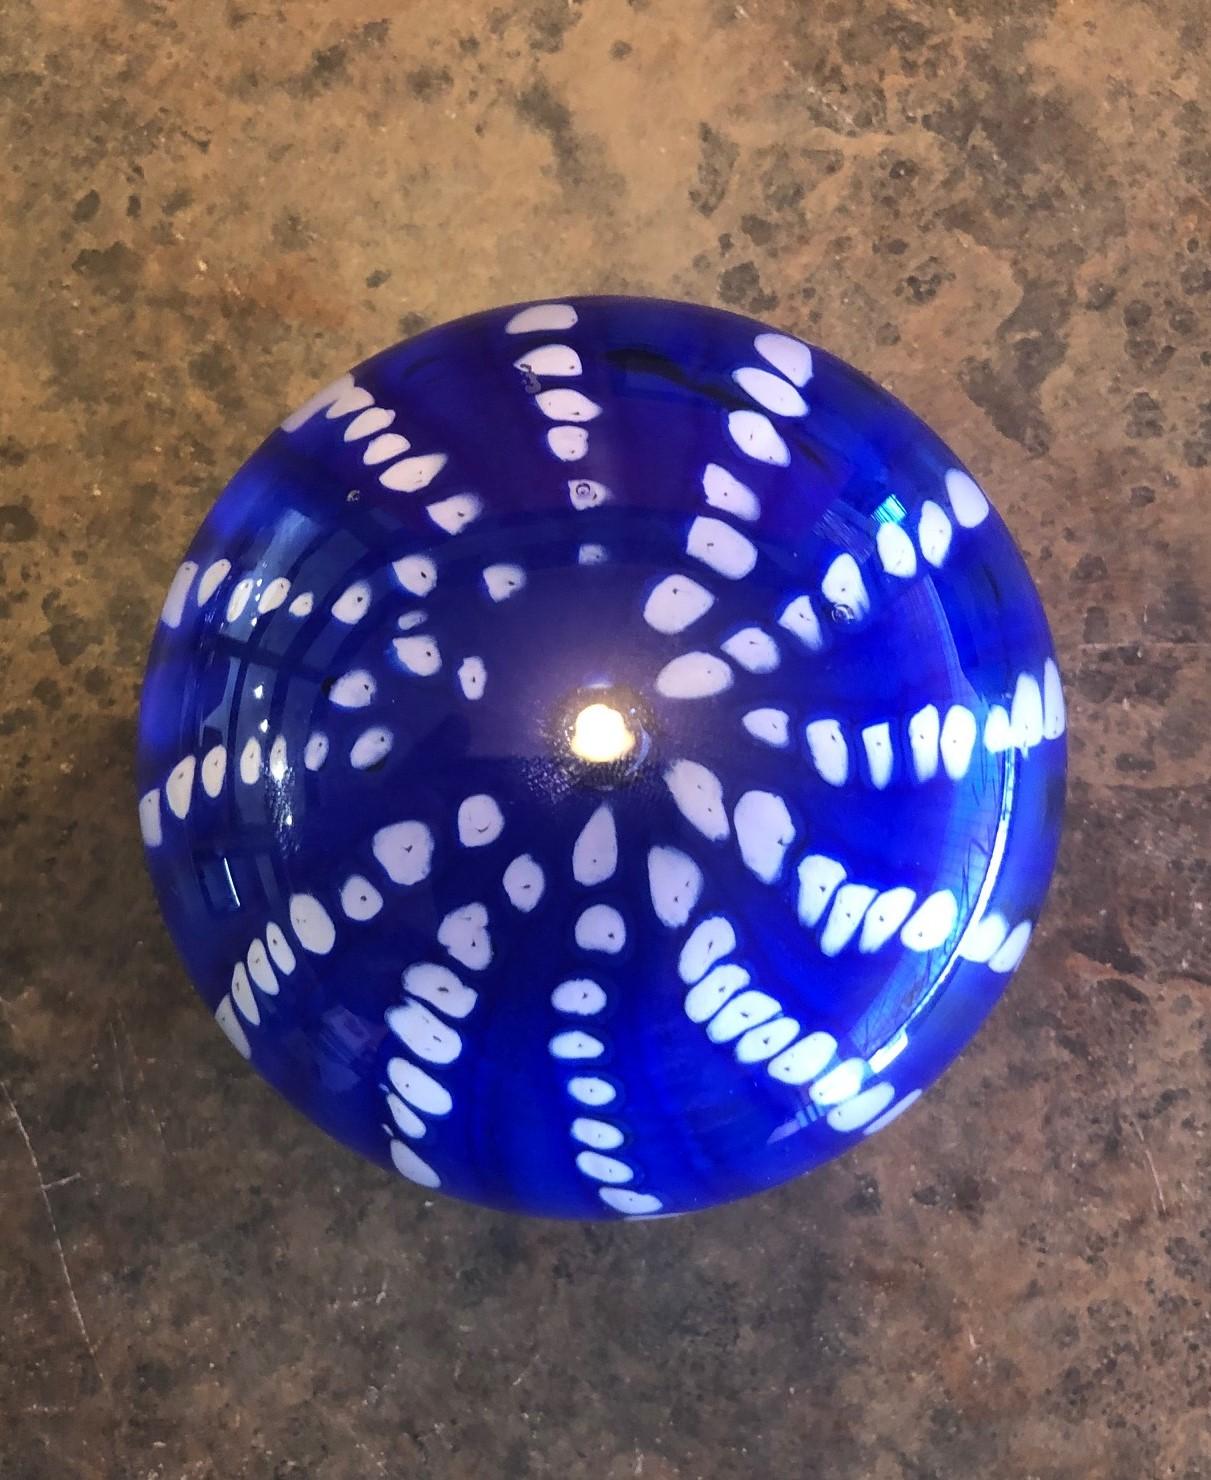 Art Glass Orb Sculpture or Paperweight by Brian Higer of American Studio In Good Condition For Sale In San Diego, CA